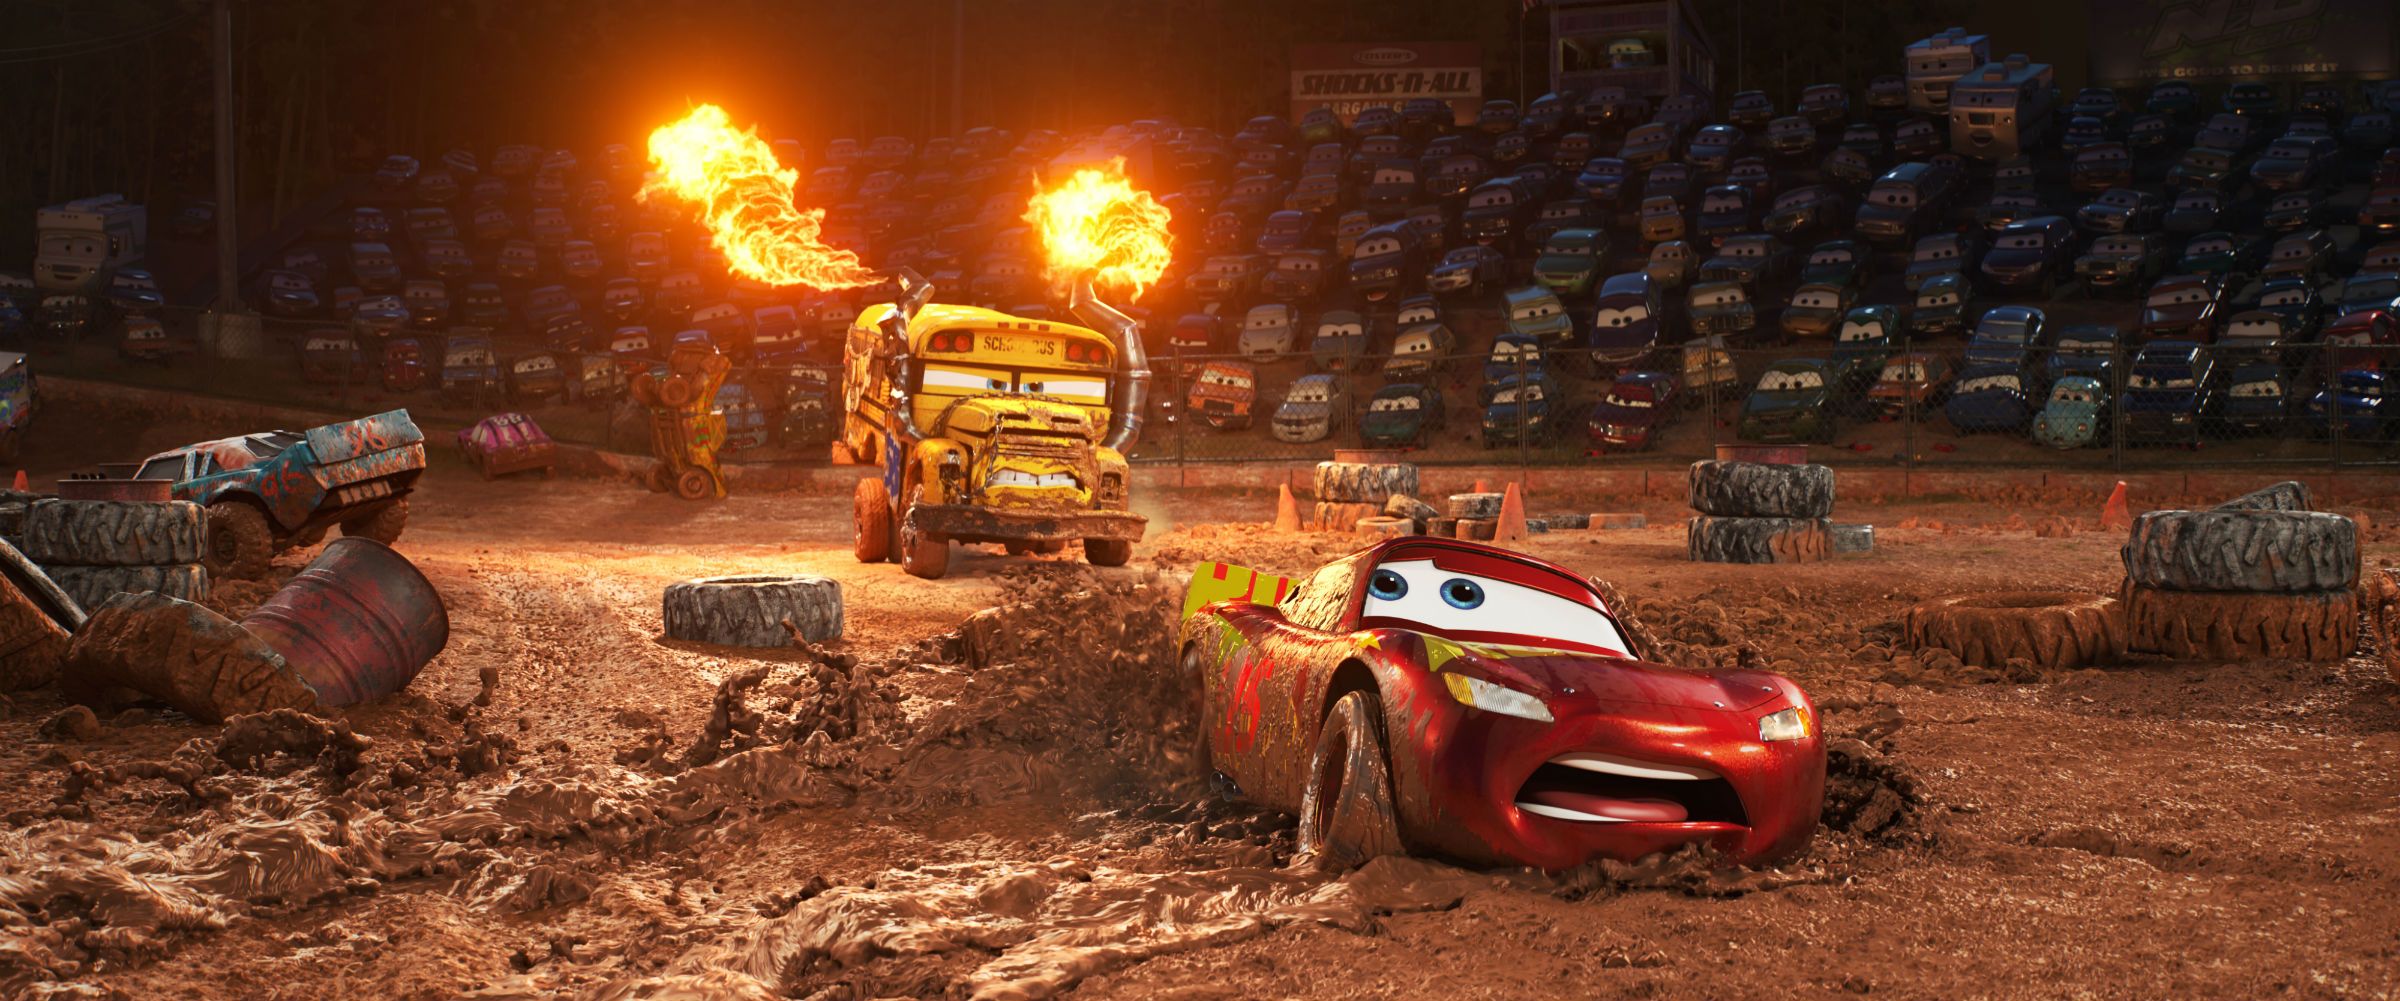 Cars 3 Easter Eggs & Pixar Connections